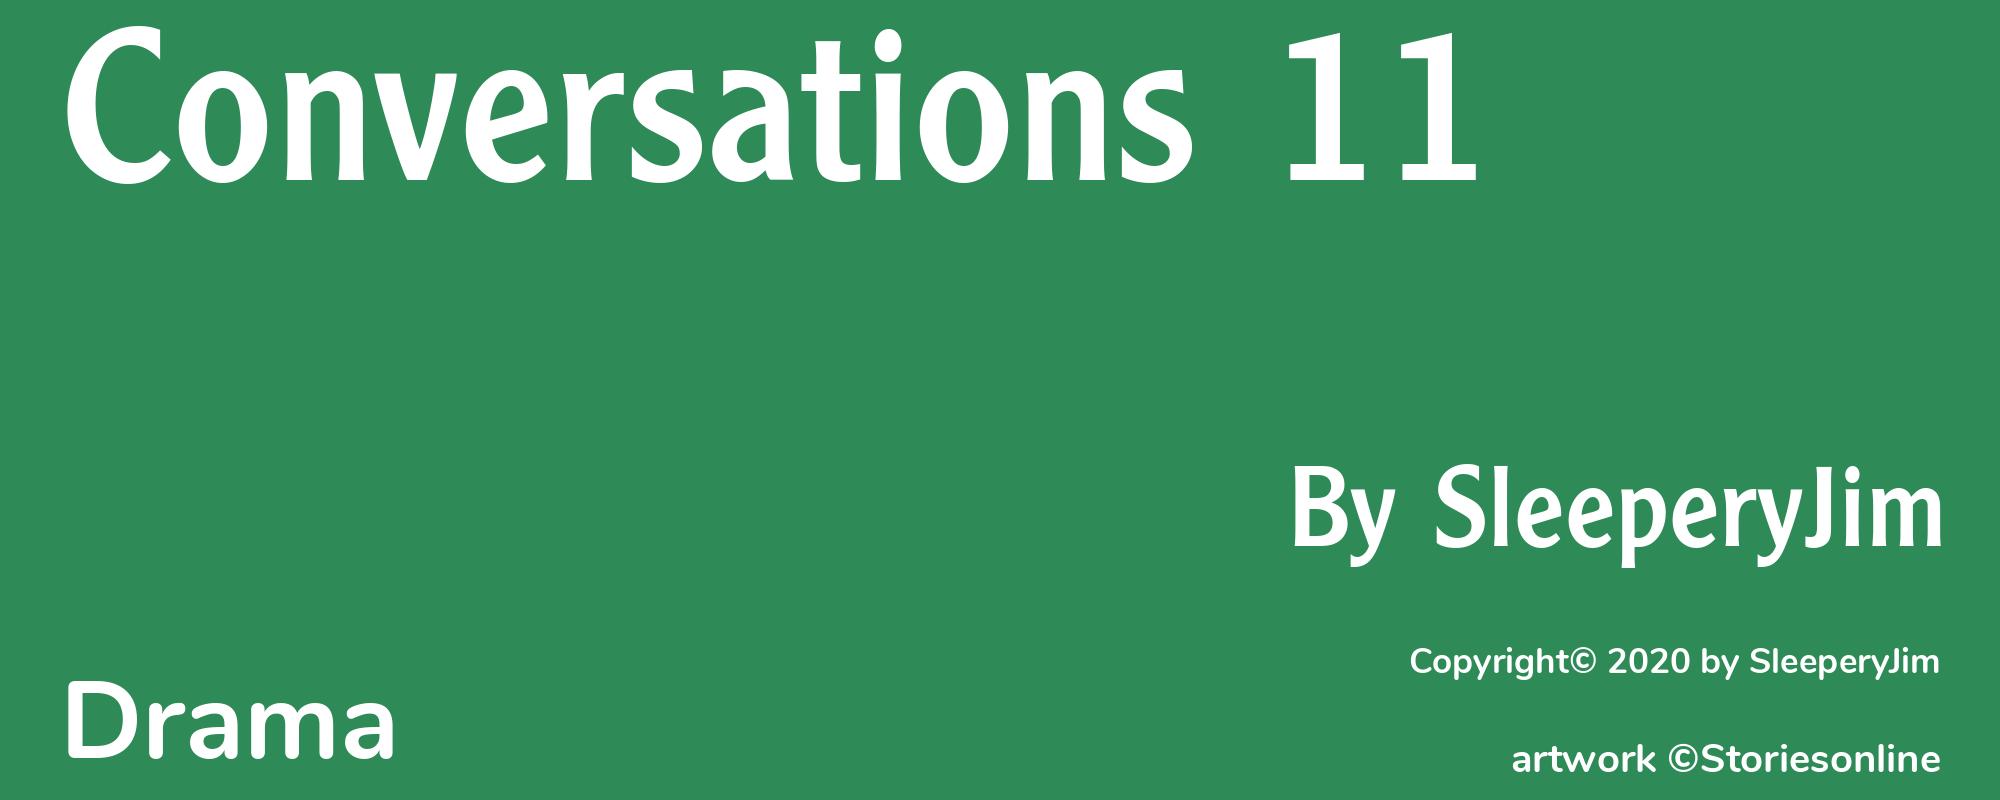 Conversations 11 - Cover